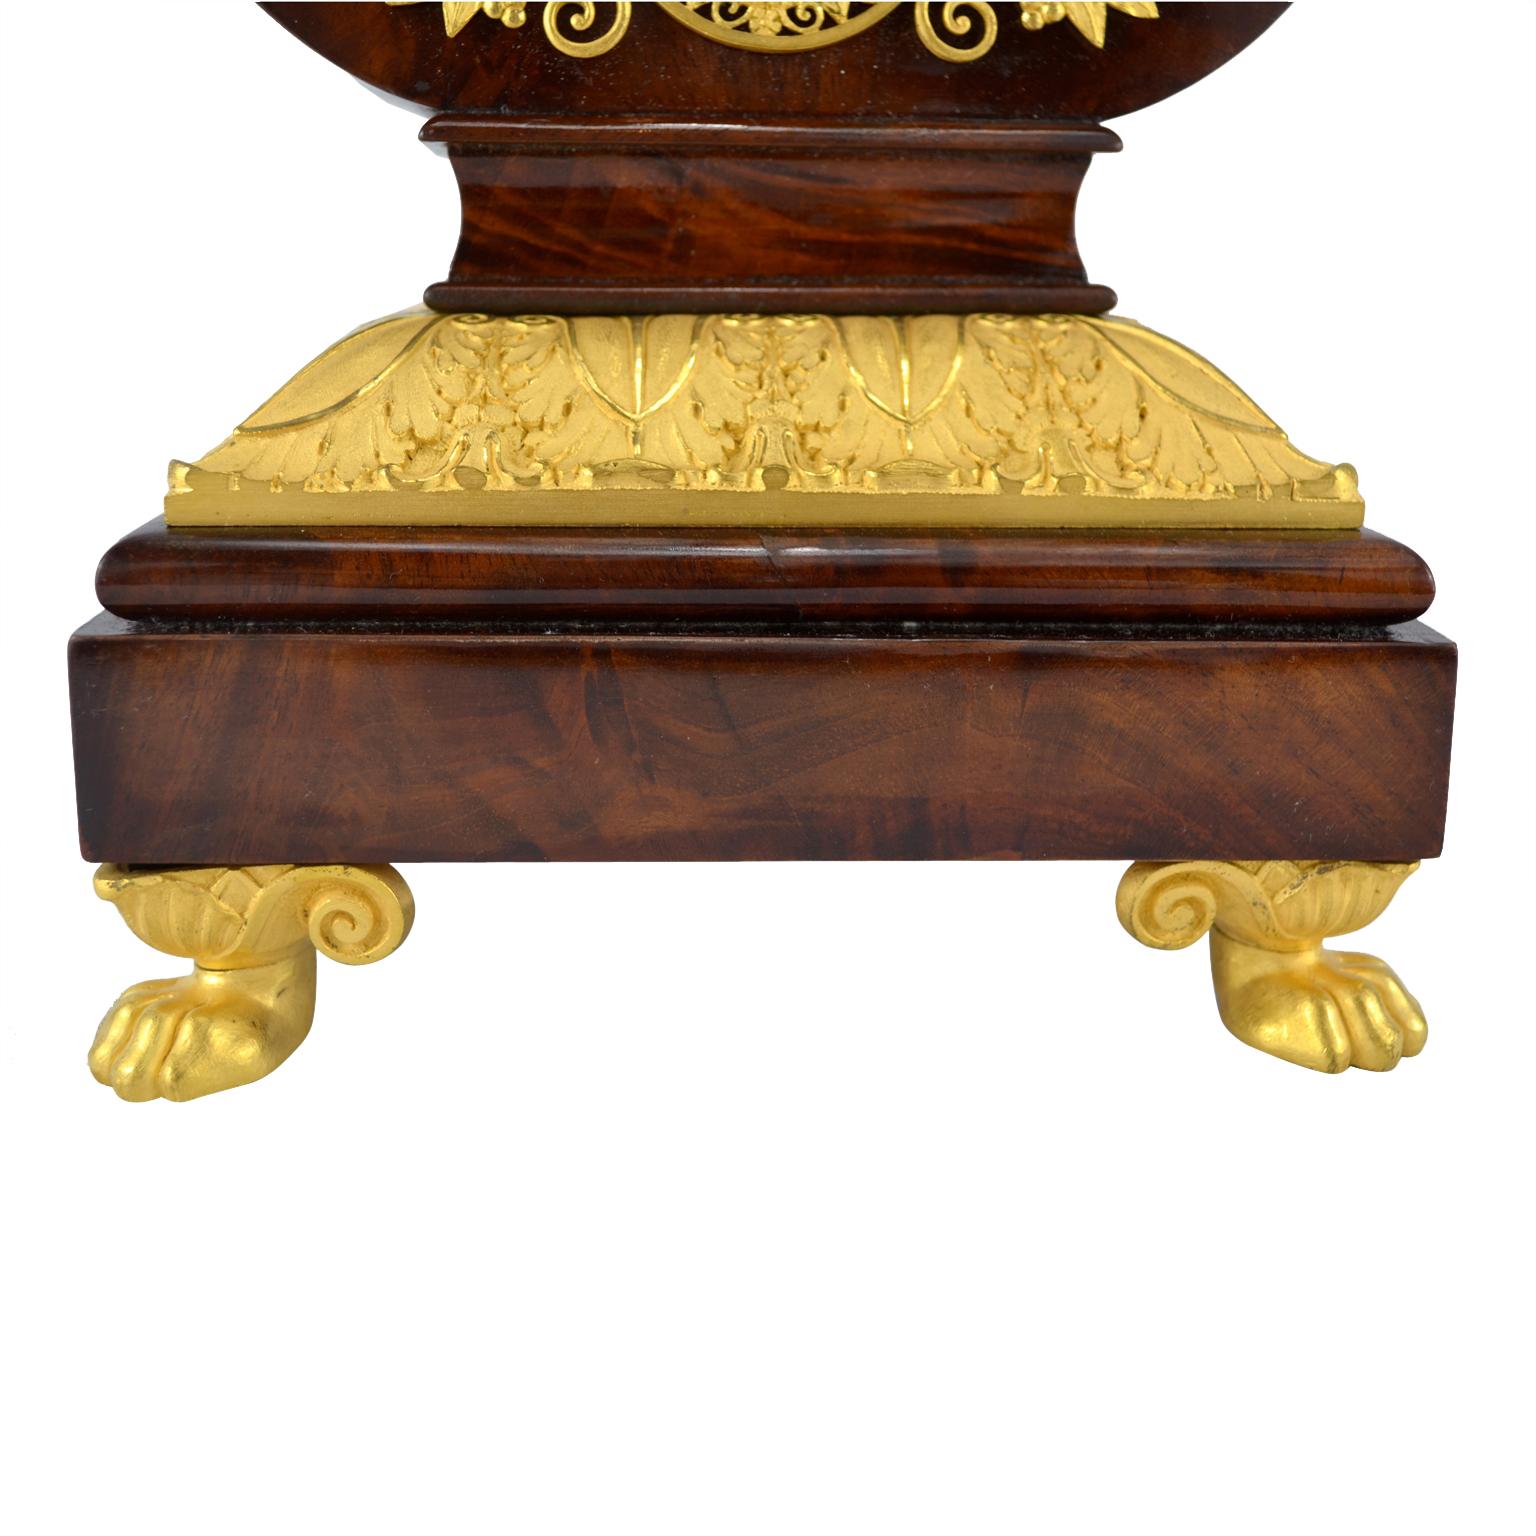  French Restauration Period Mahogany and Gilt Bronze Lyre Clock In Good Condition For Sale In Vancouver, British Columbia